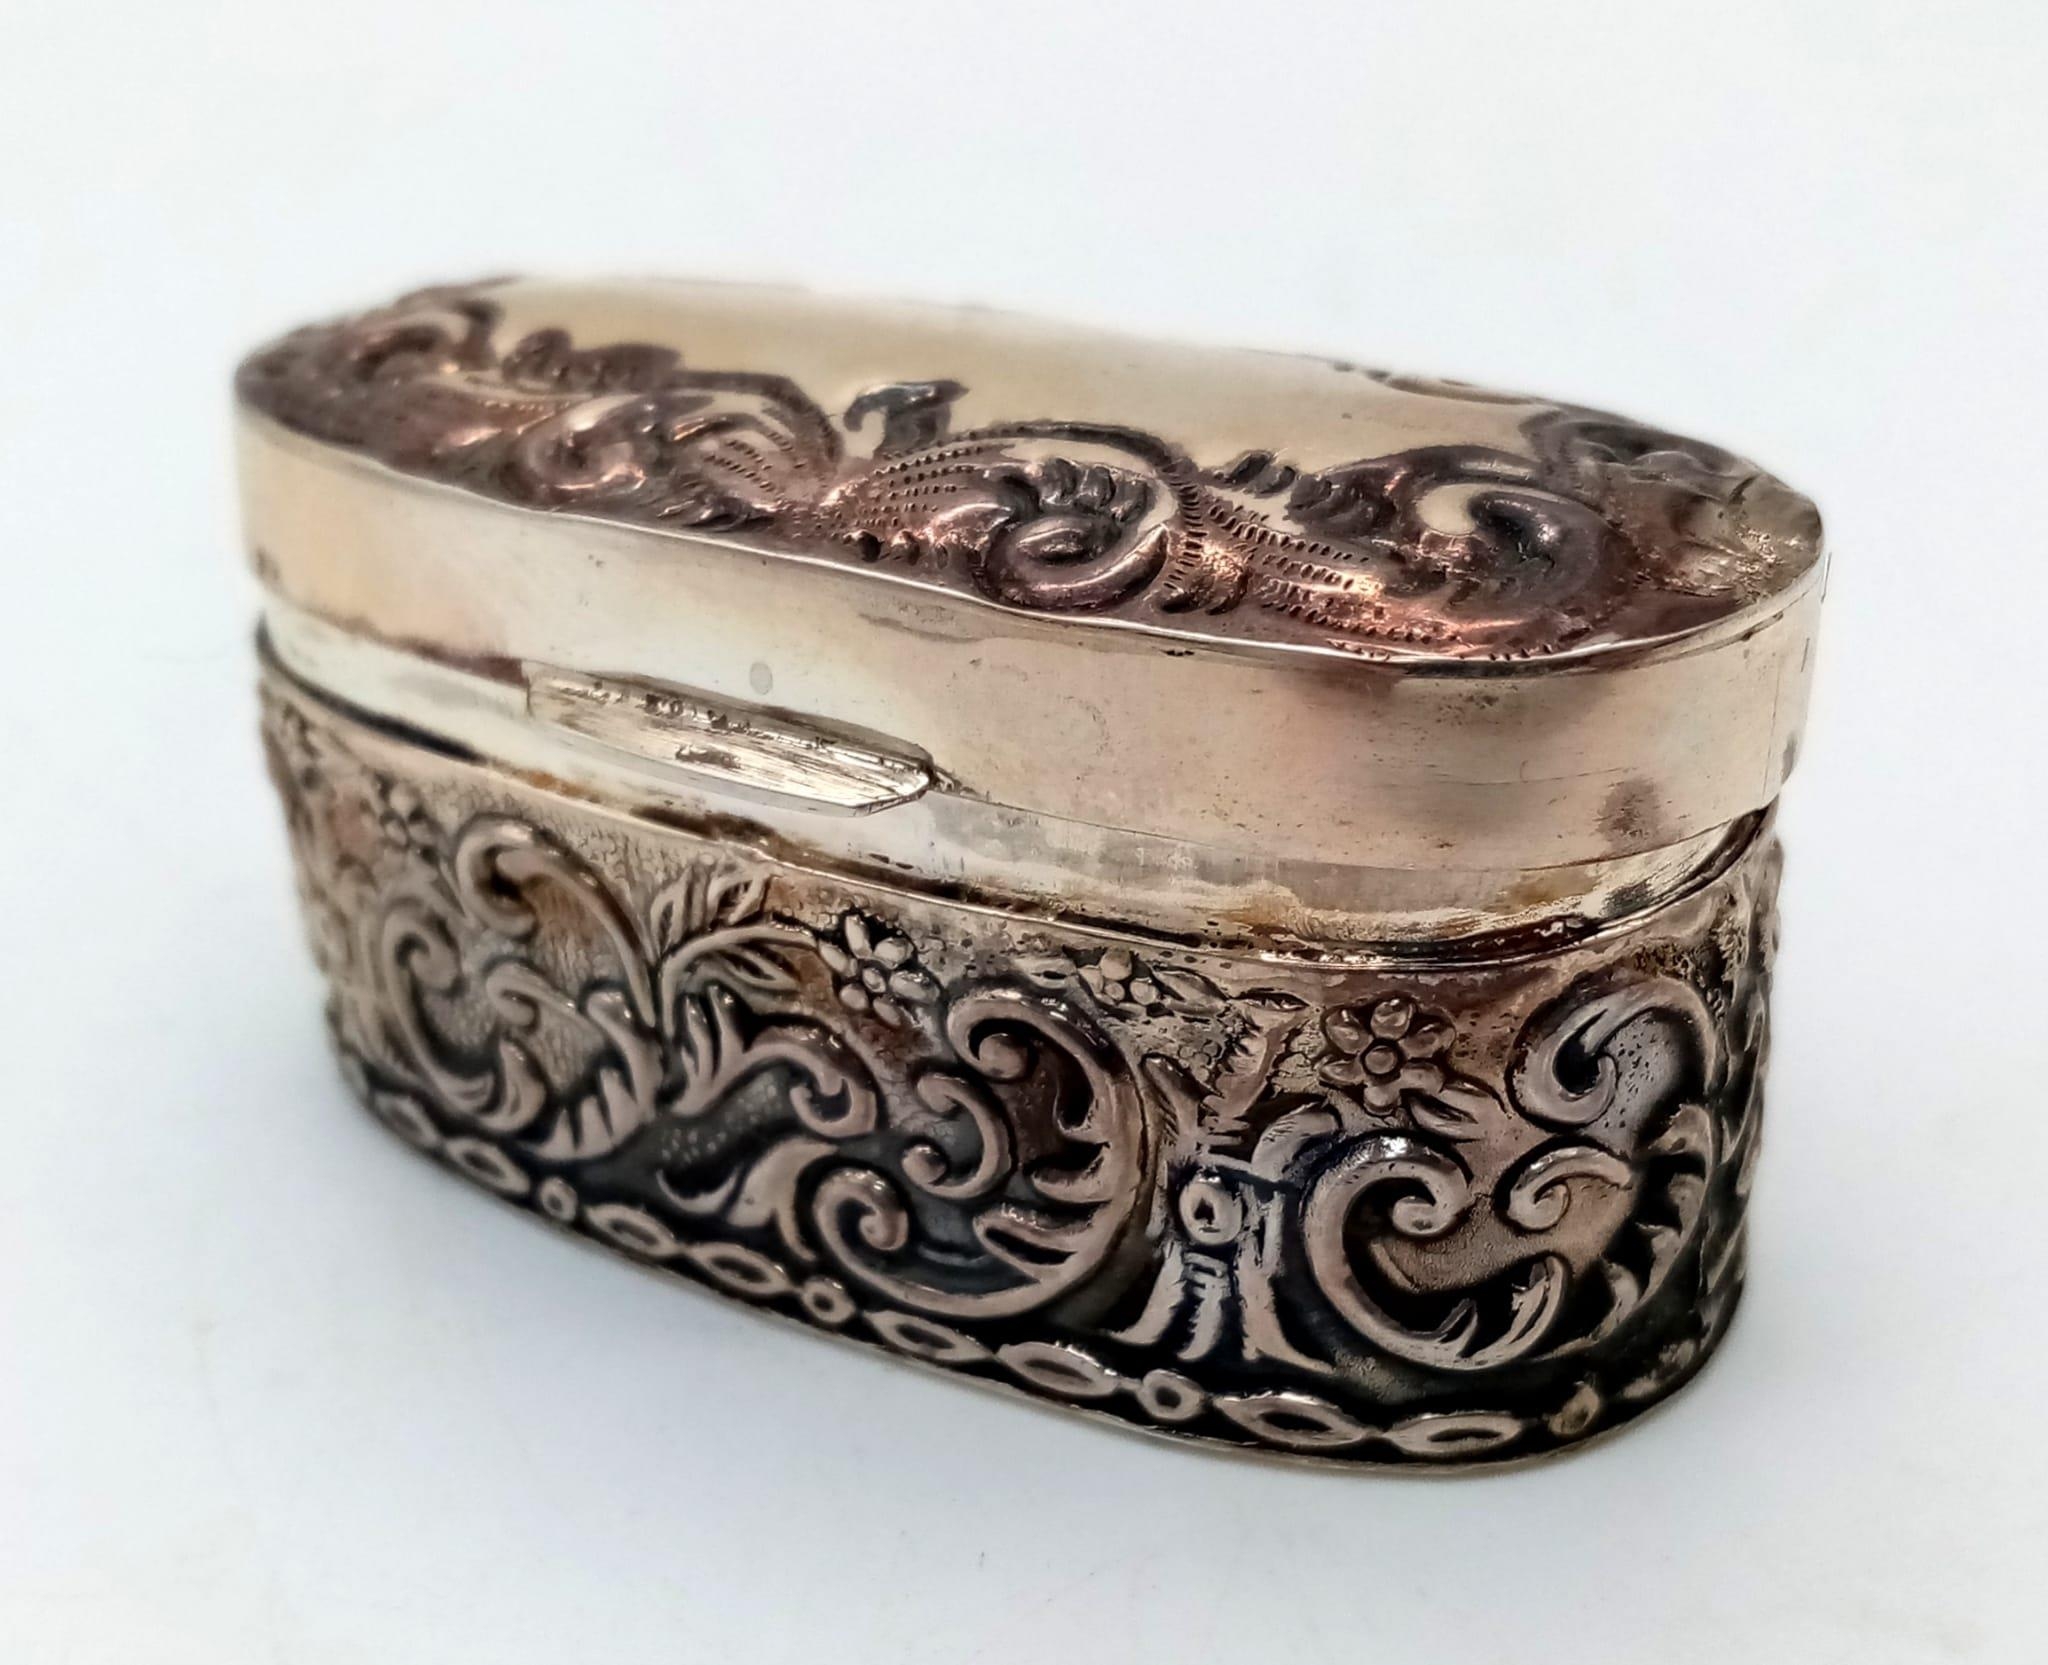 An Antique Silver Oval Trinket Box with Scrolled Decoration. 28g. 5 x 2.5cm. - Image 2 of 3